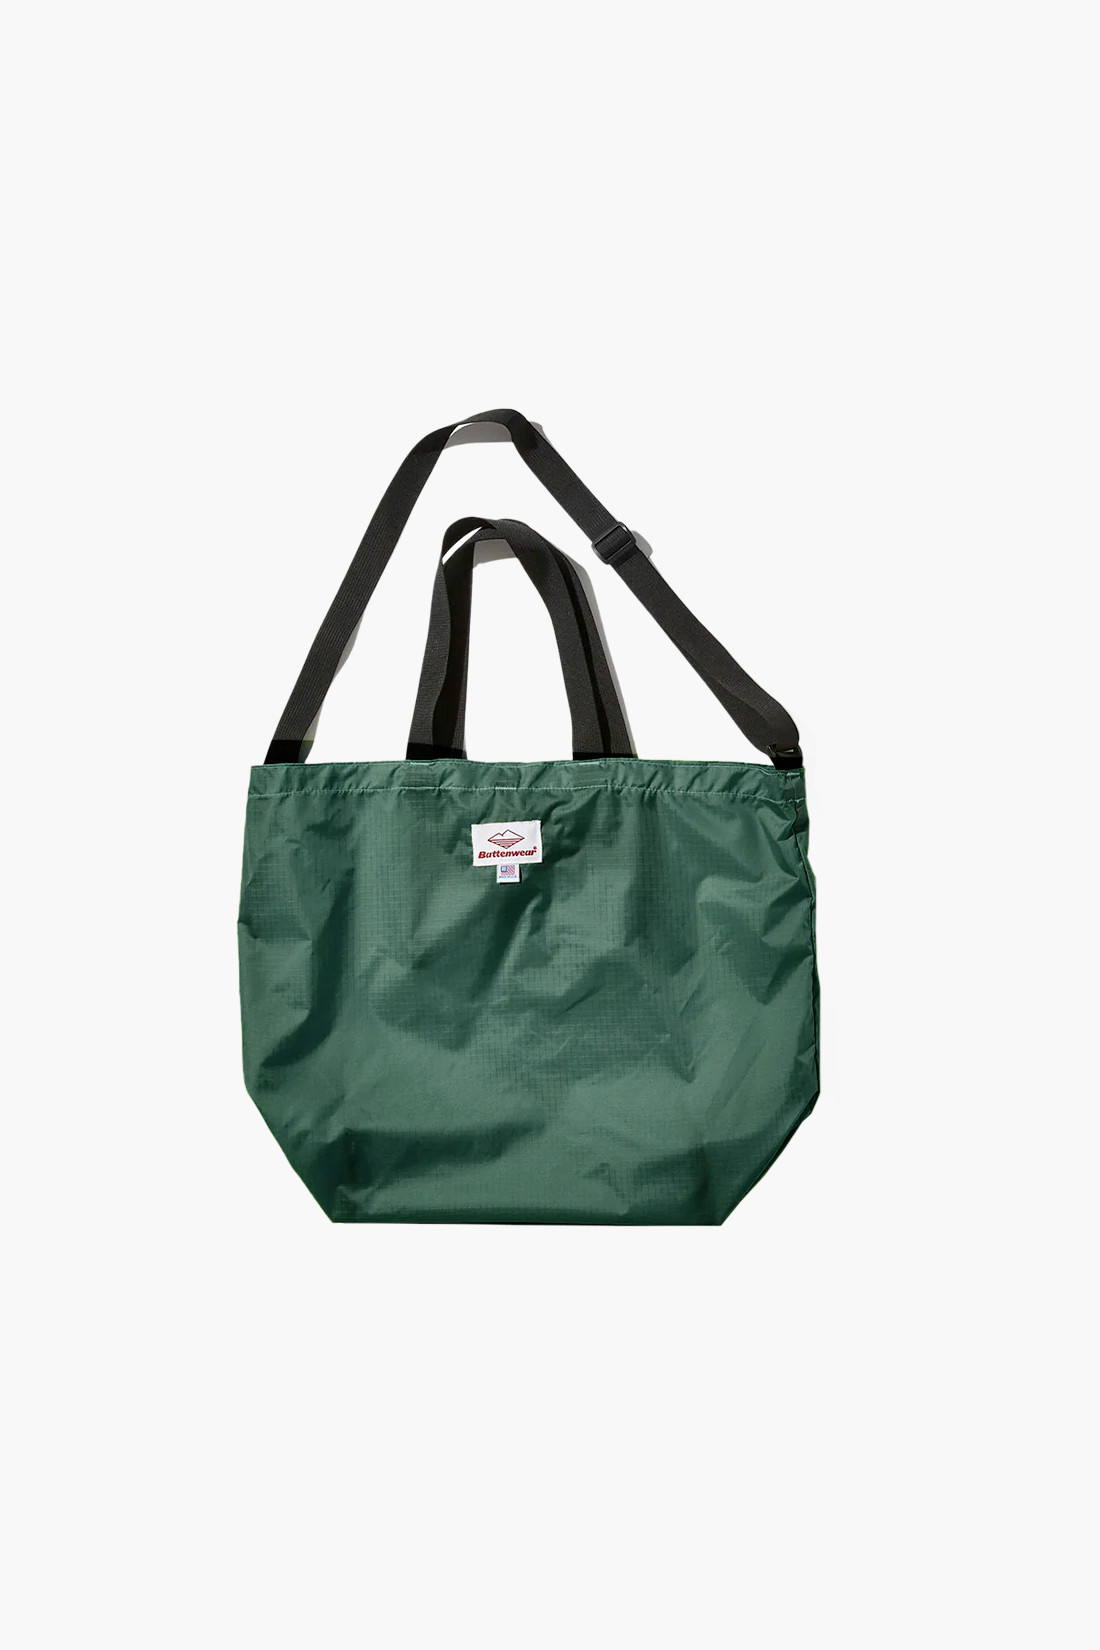 Packable tote Forest green/black